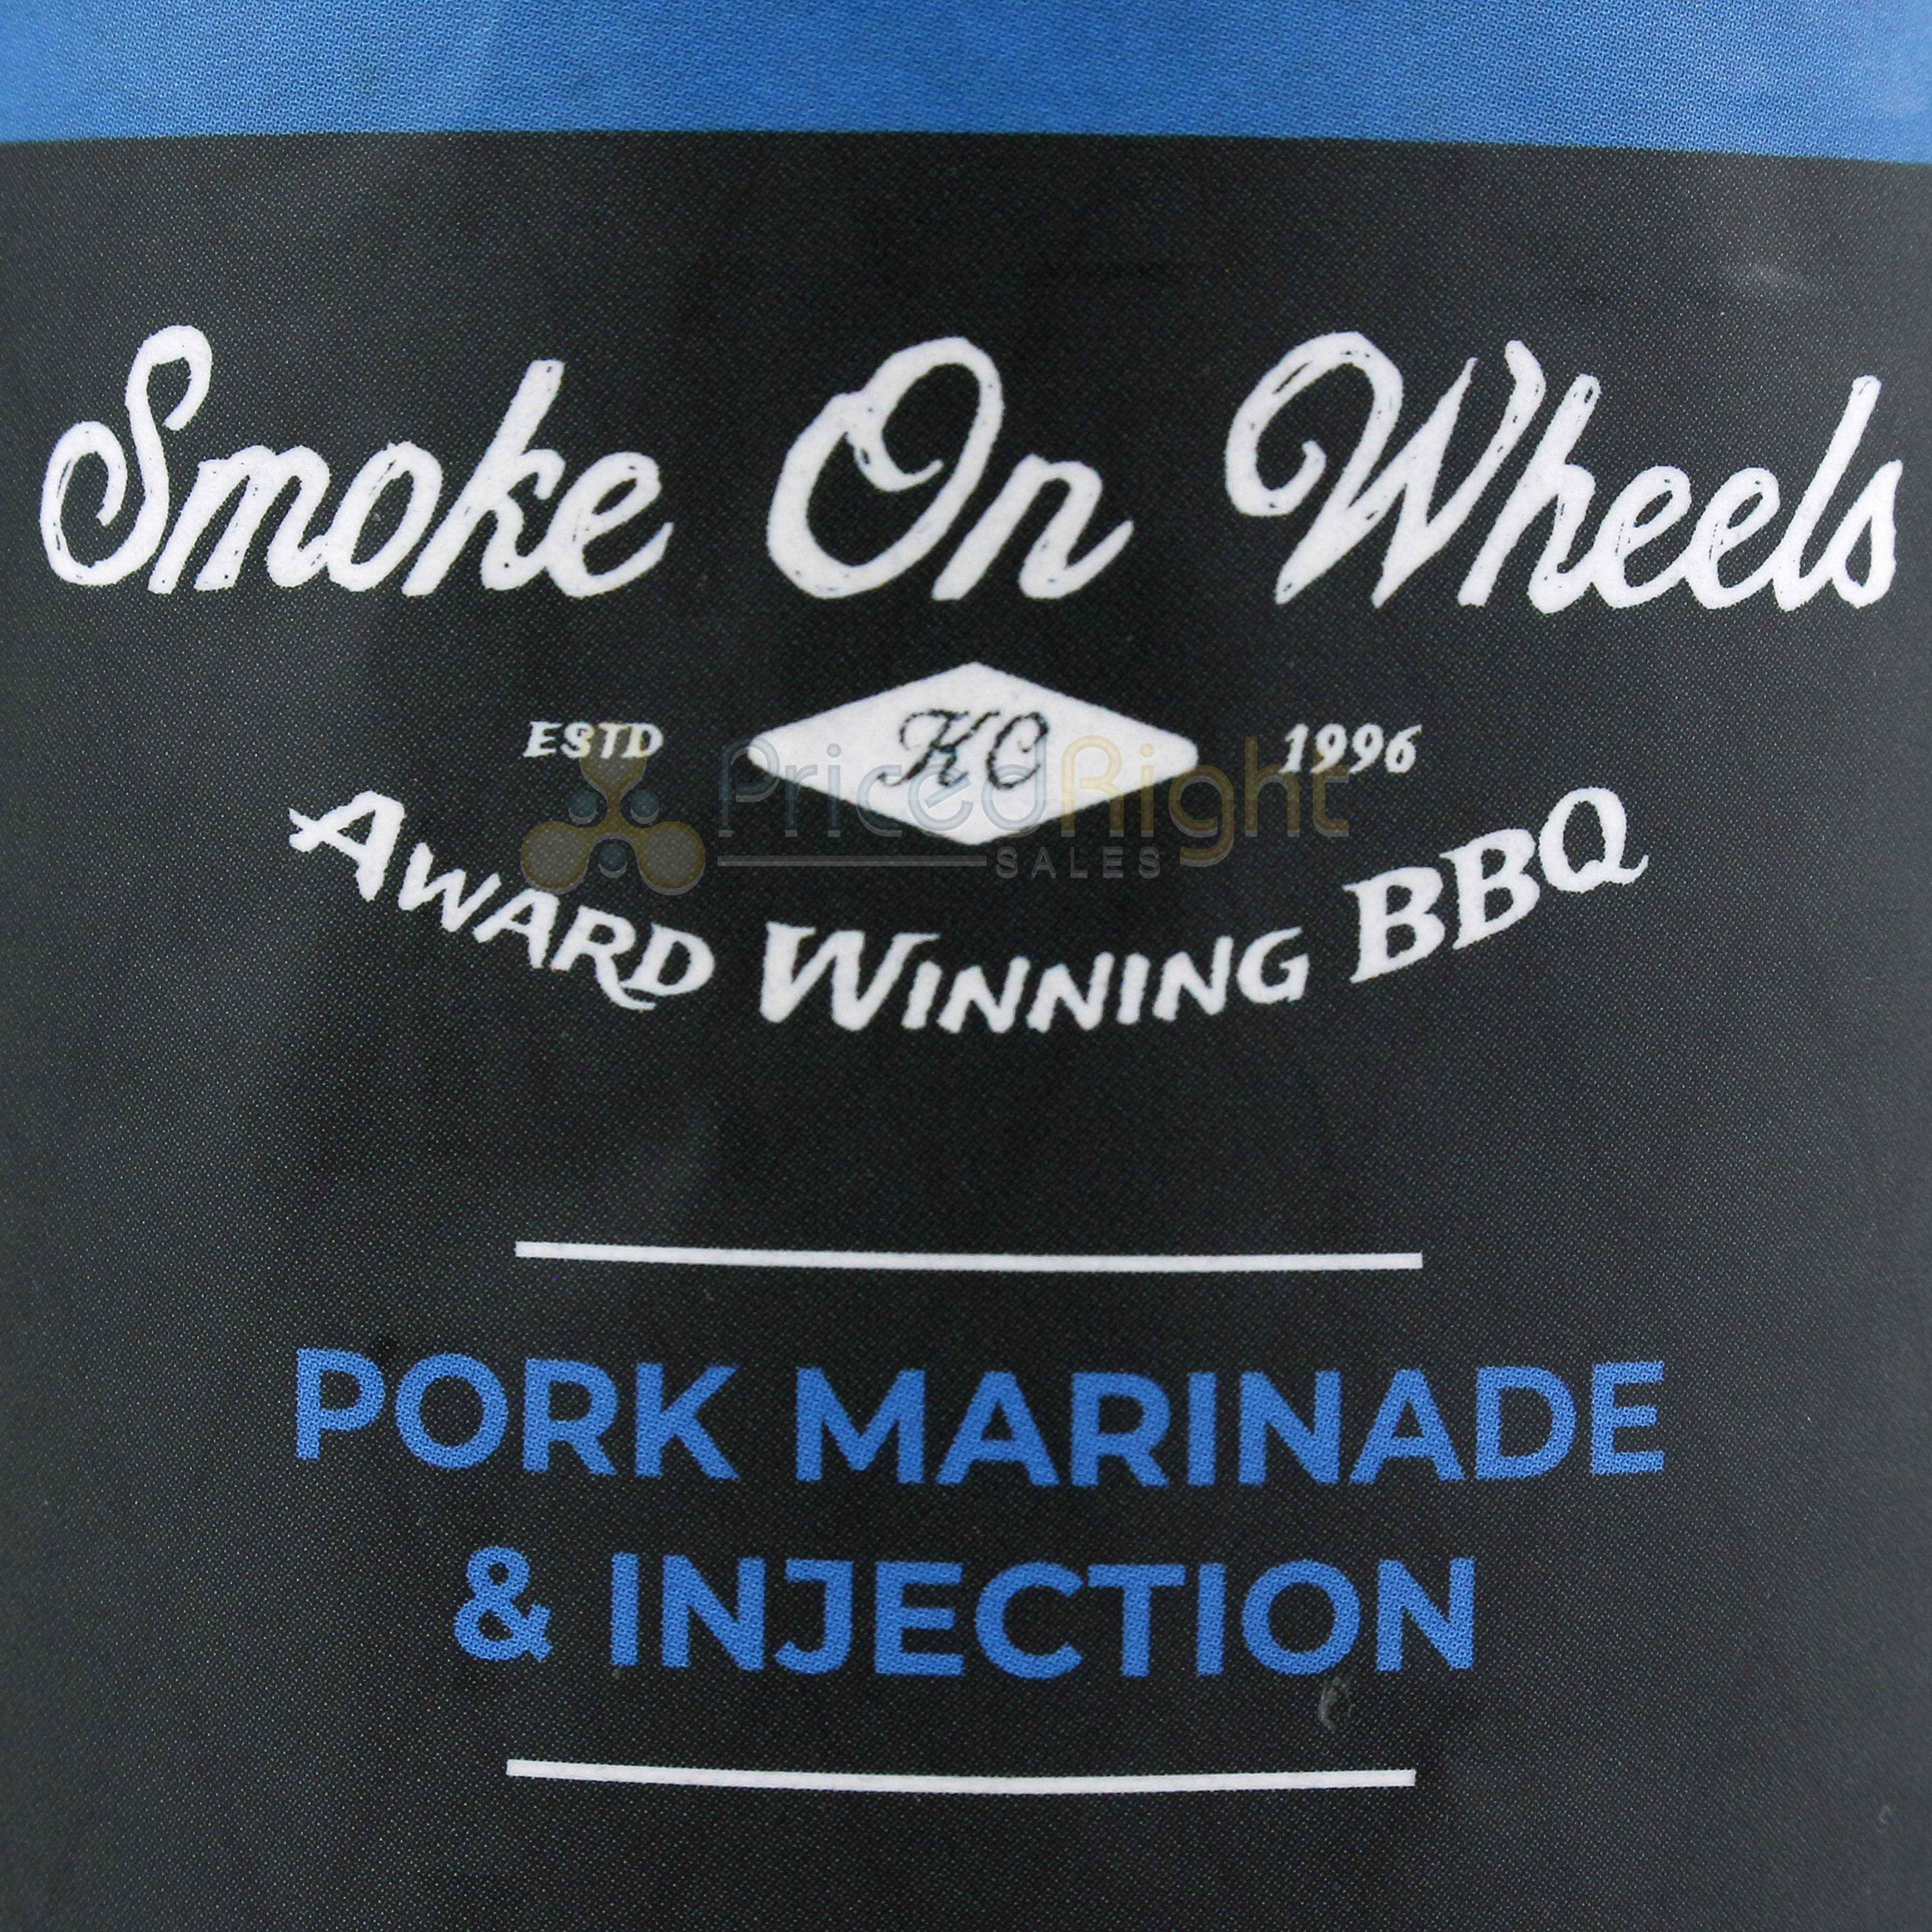 Smoke on Wheels 16oz Pork Marinade & Injection Gluten Msg Free Competition Rated